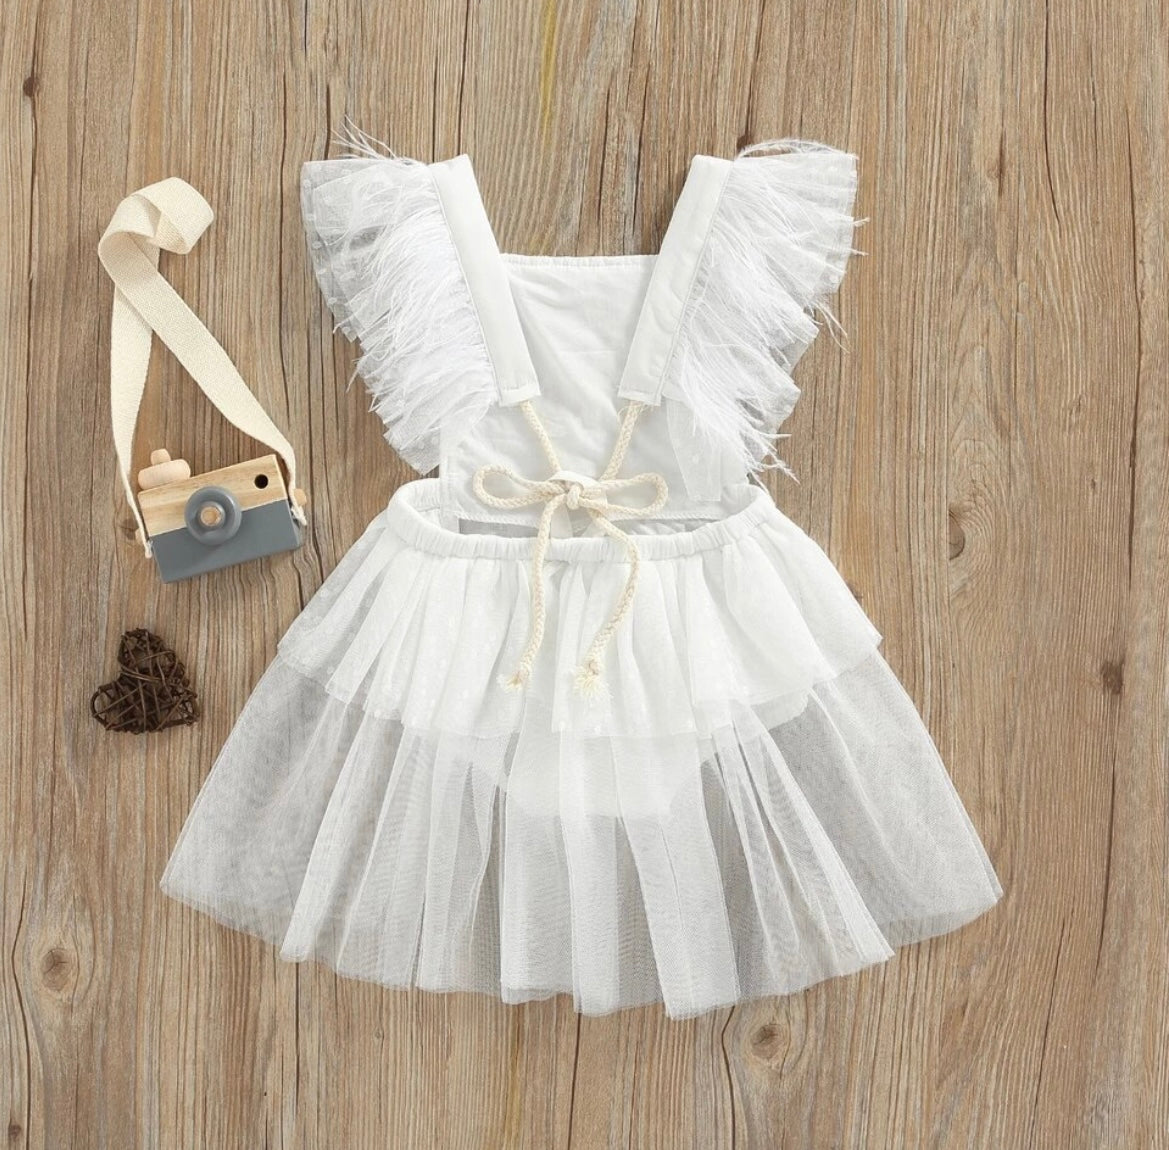 Girls First Birthday Lace “One” Romper - White.